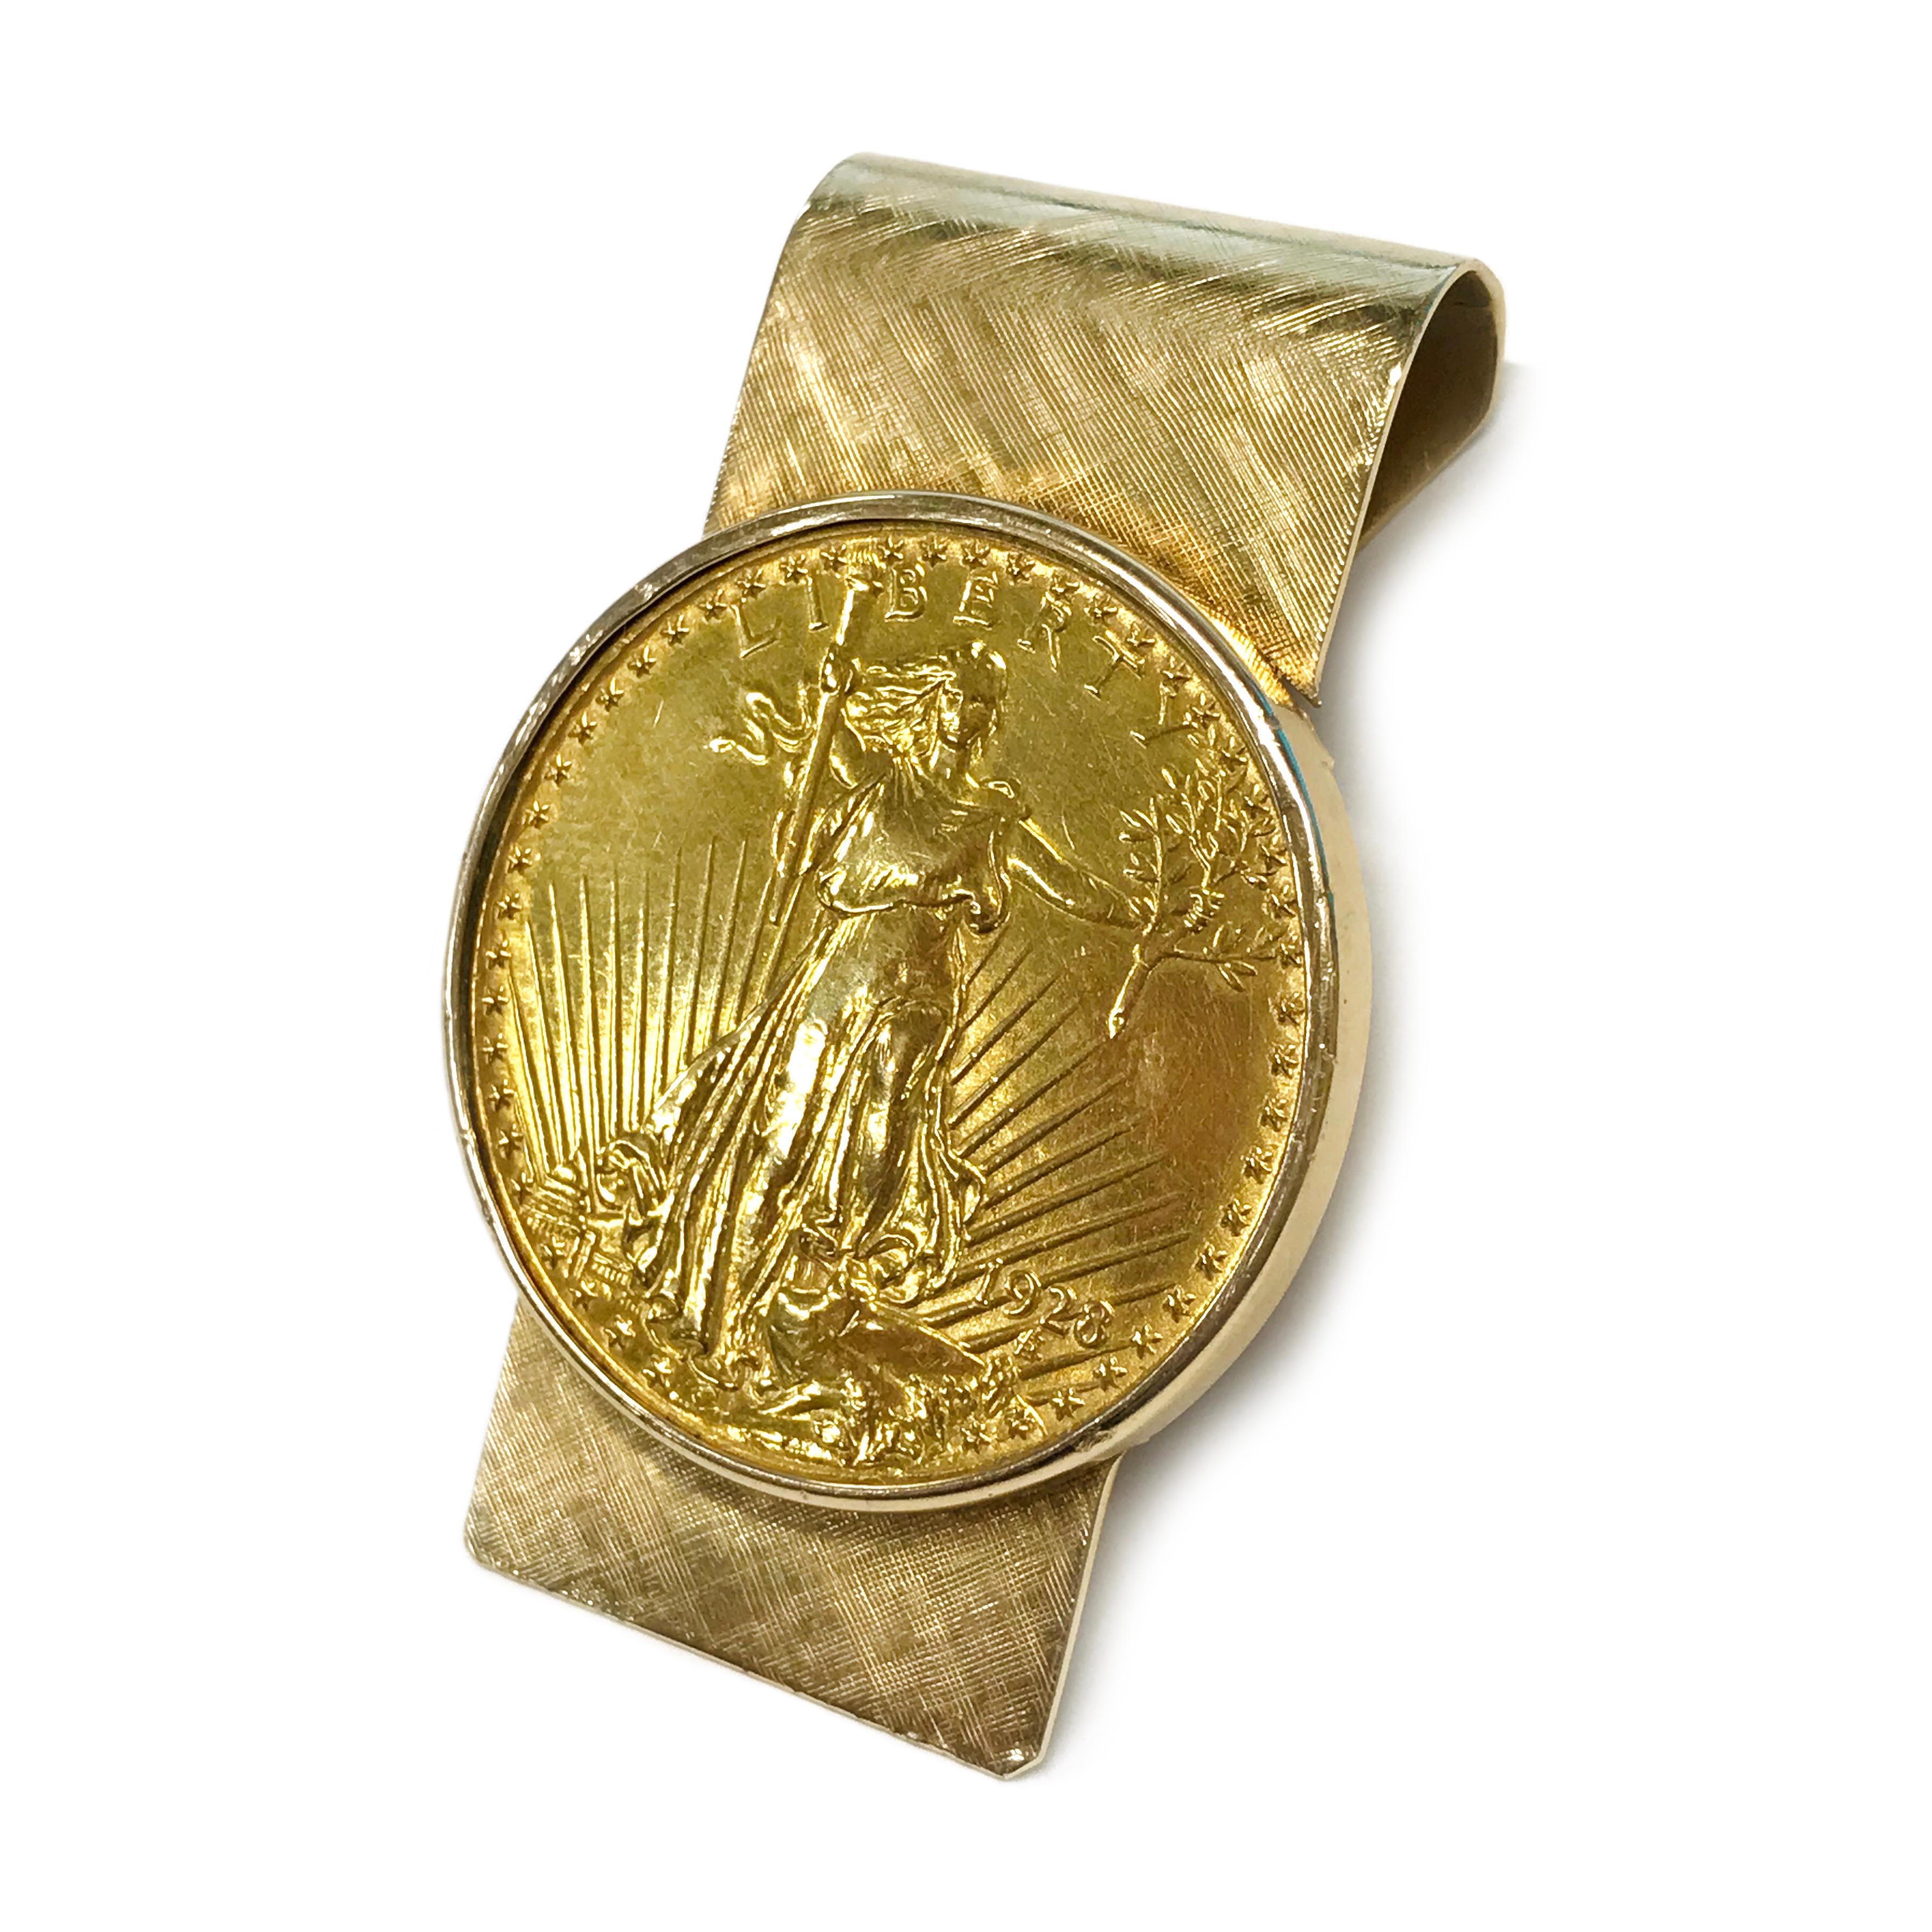  The coin is well struck, bright, and bold and bezel-set on the money clip. Saint Gaudens Gold Double Eagles coin is a favorite with collectors and investors alike. The money clip has a Florentine finish on the front and a smooth finish on the back.